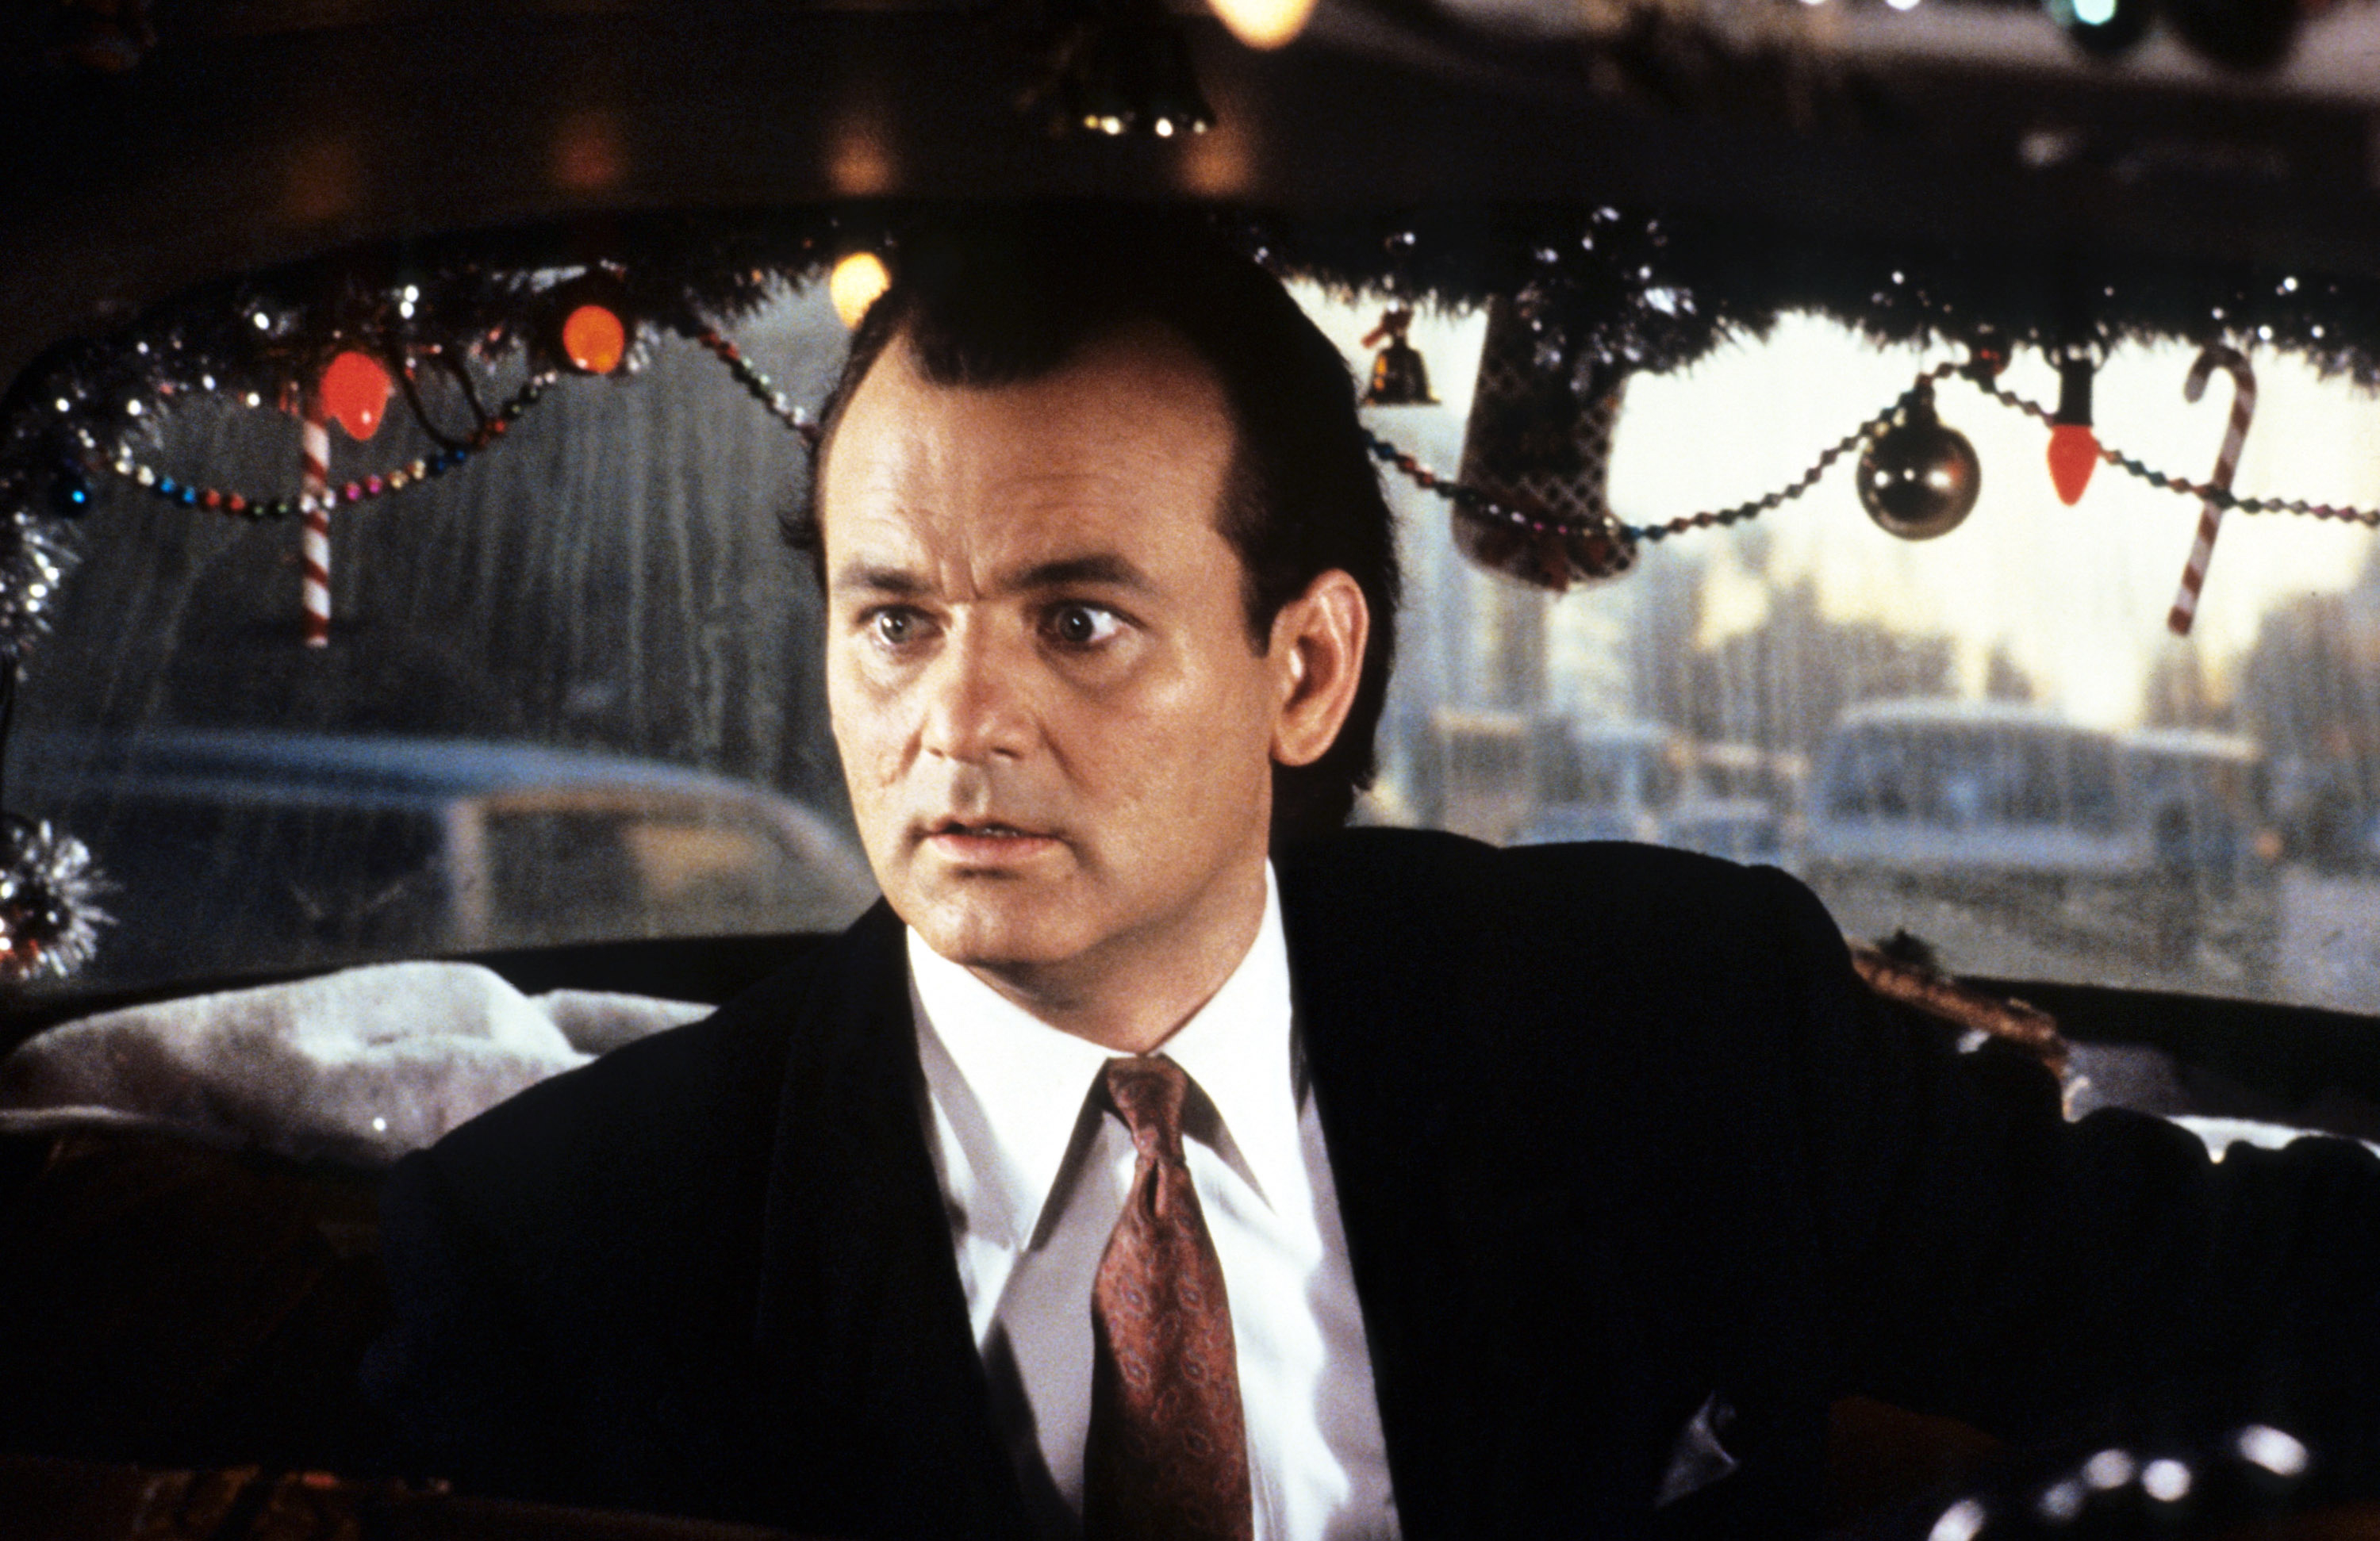 bill murray sitting in the back of a christmas decorated cab